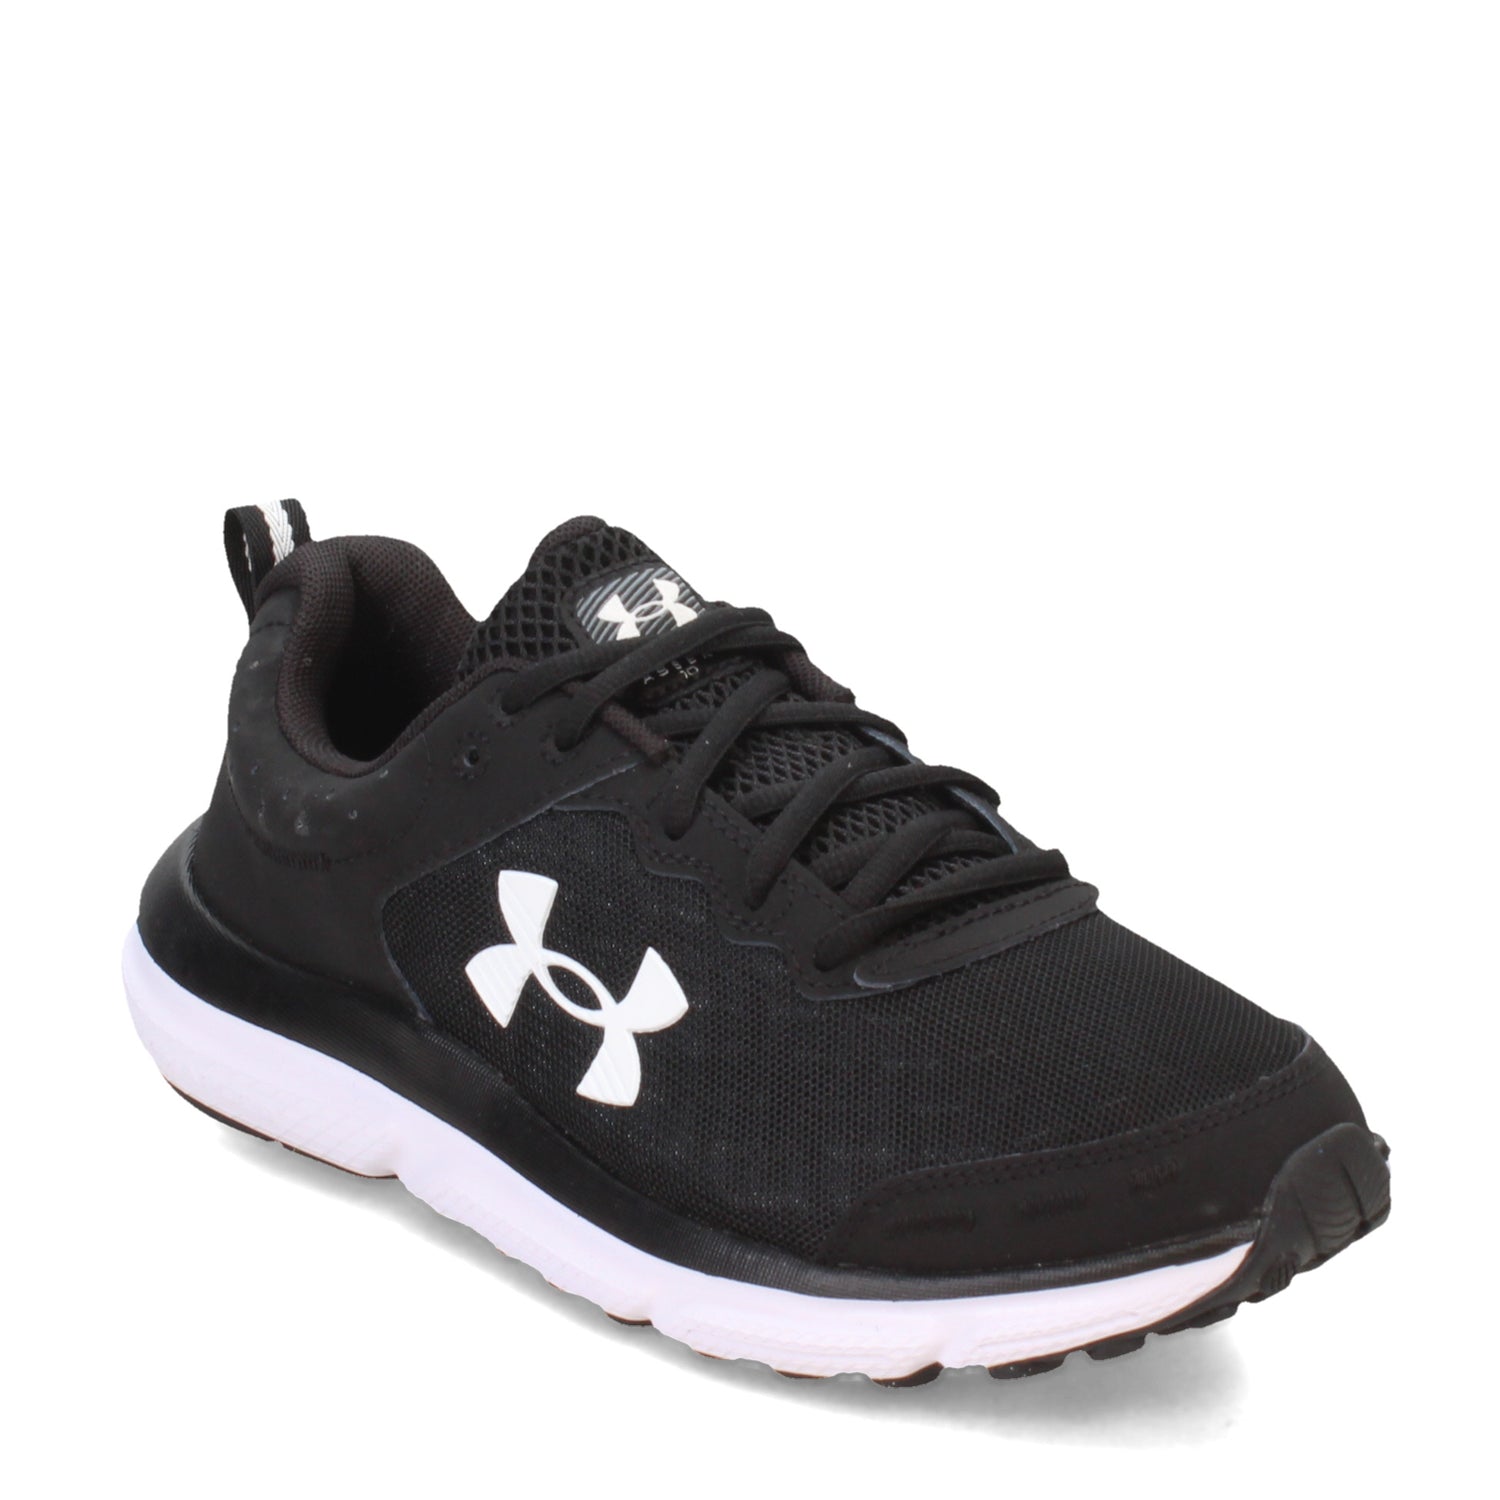  Under Armour Women's Charged Assert 10, (001)  Black/Black/White, 5, US